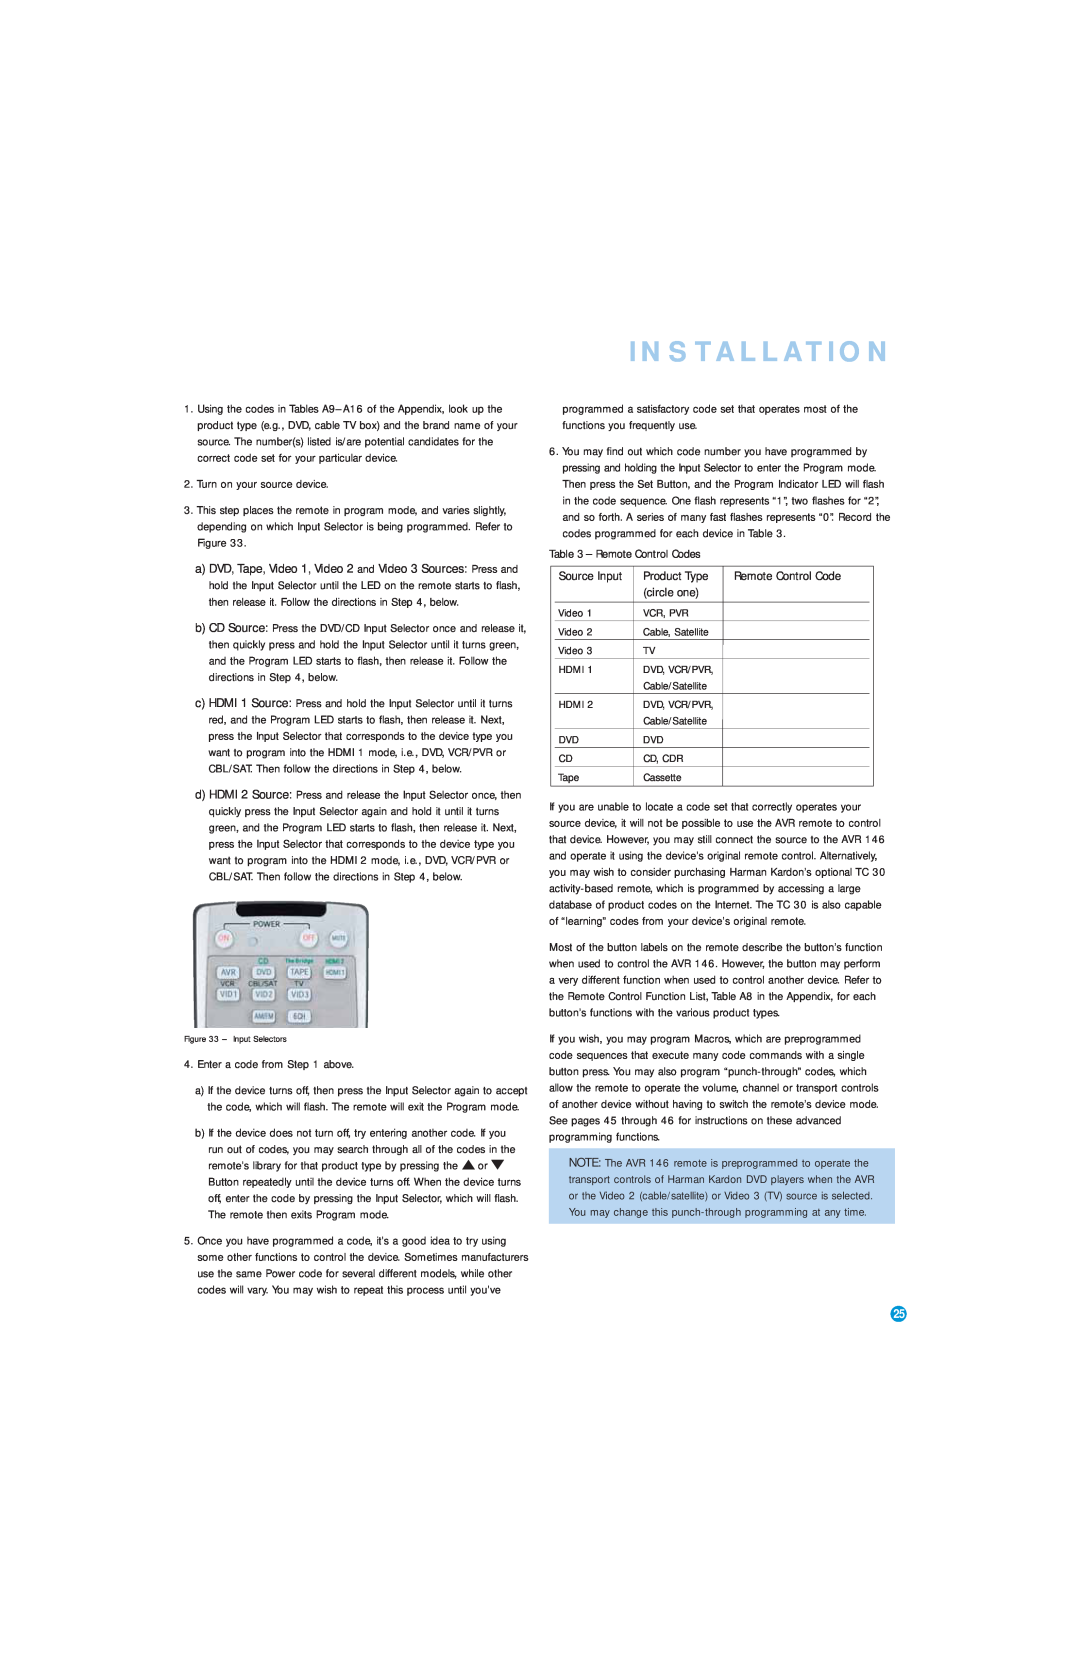 Harman-Kardon AVR 146 owner manual Installation, Turn on your source device, Enter a code from above 